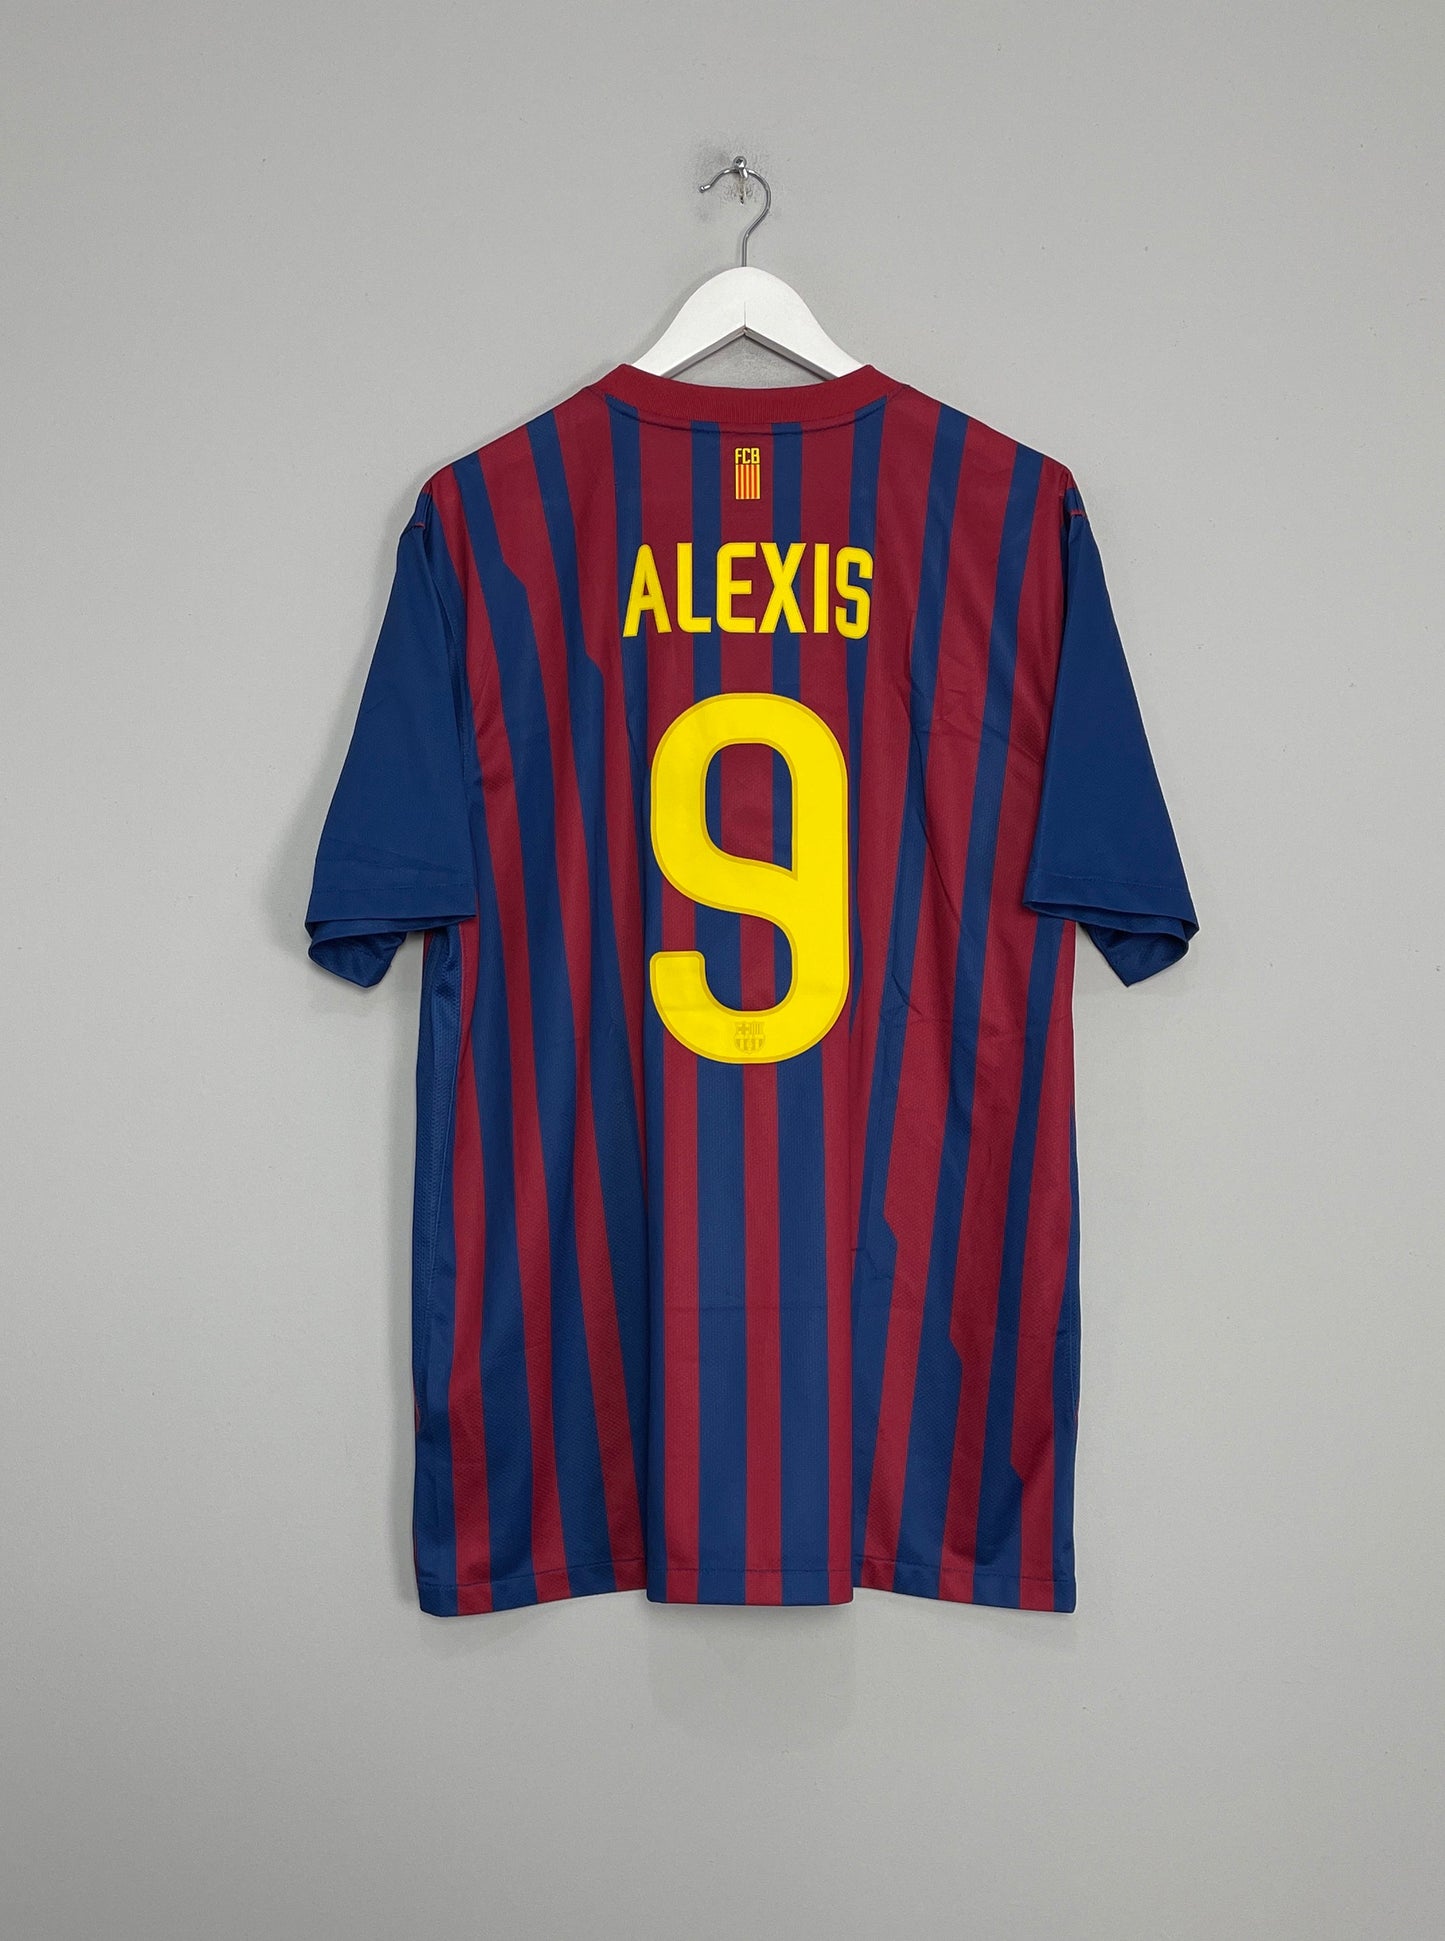 Image of the Barcelona Alexis shirt from the 2011/12 season